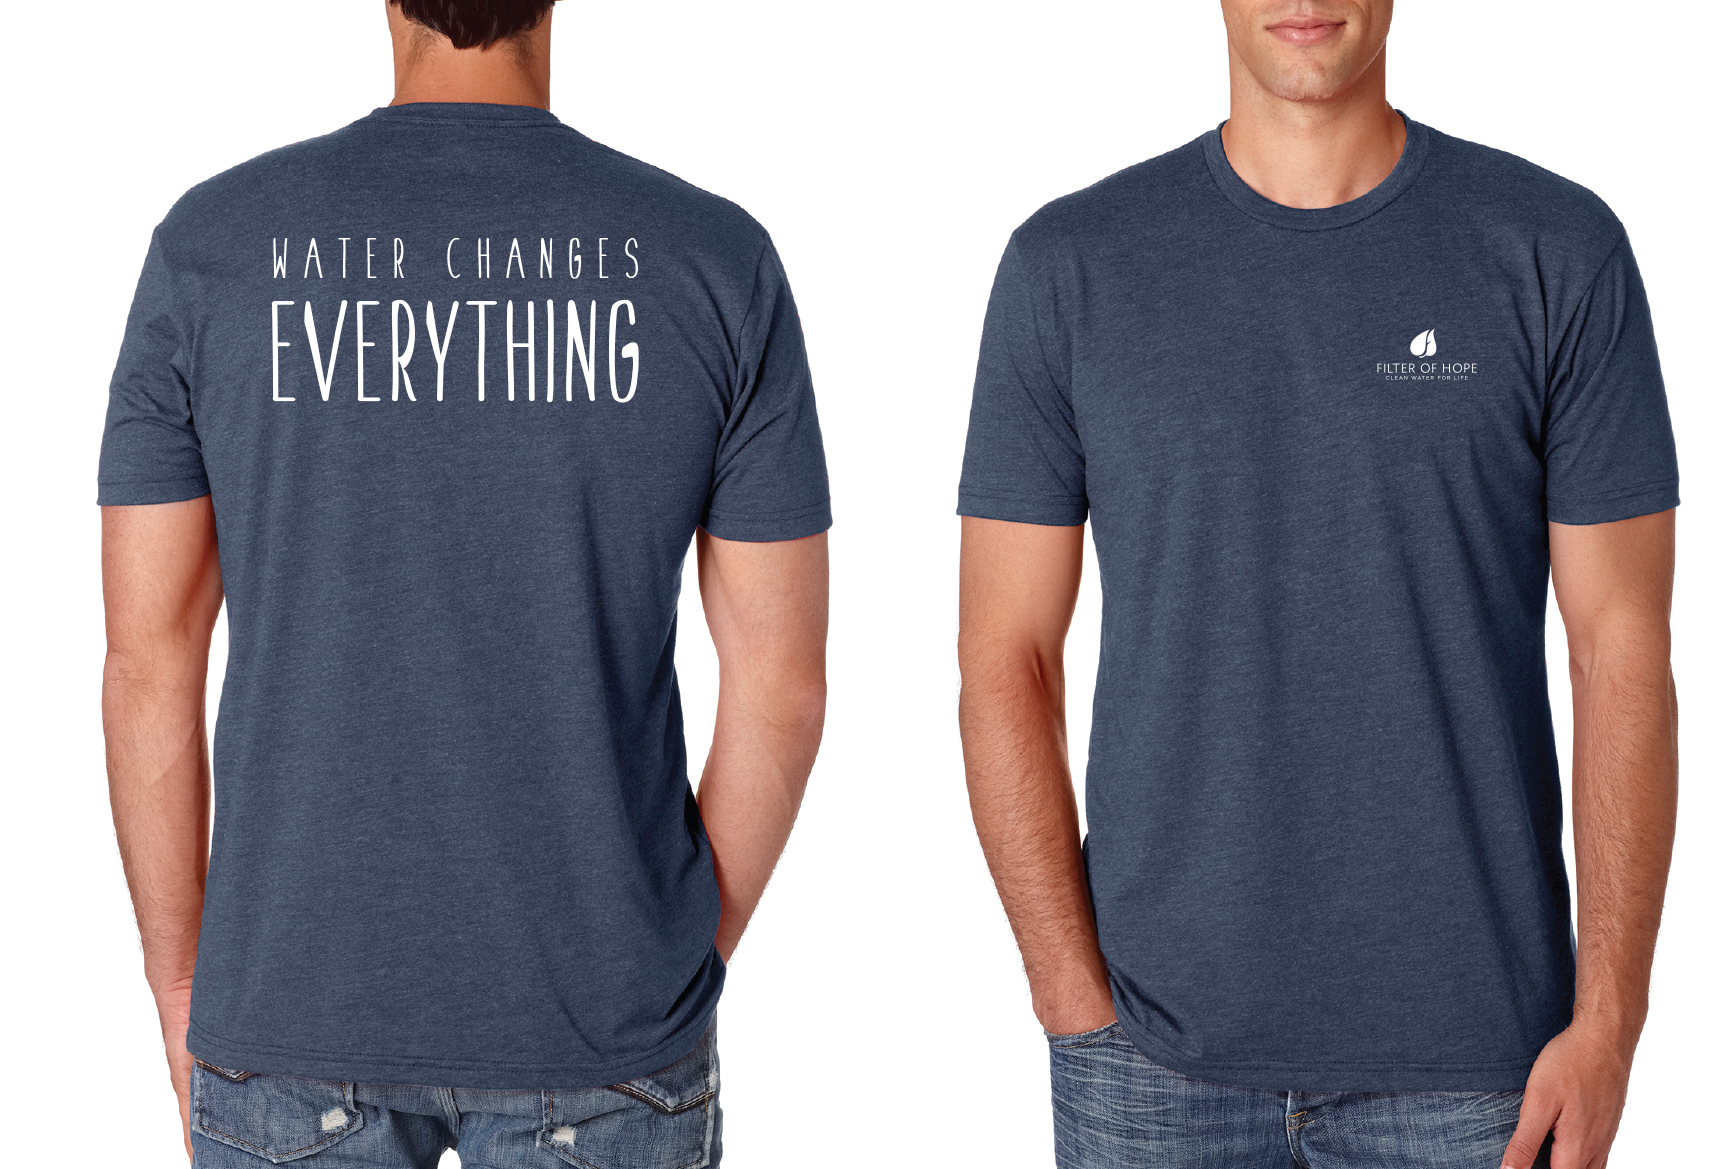 WATER CHANGES EVERYTHING TSHIRT